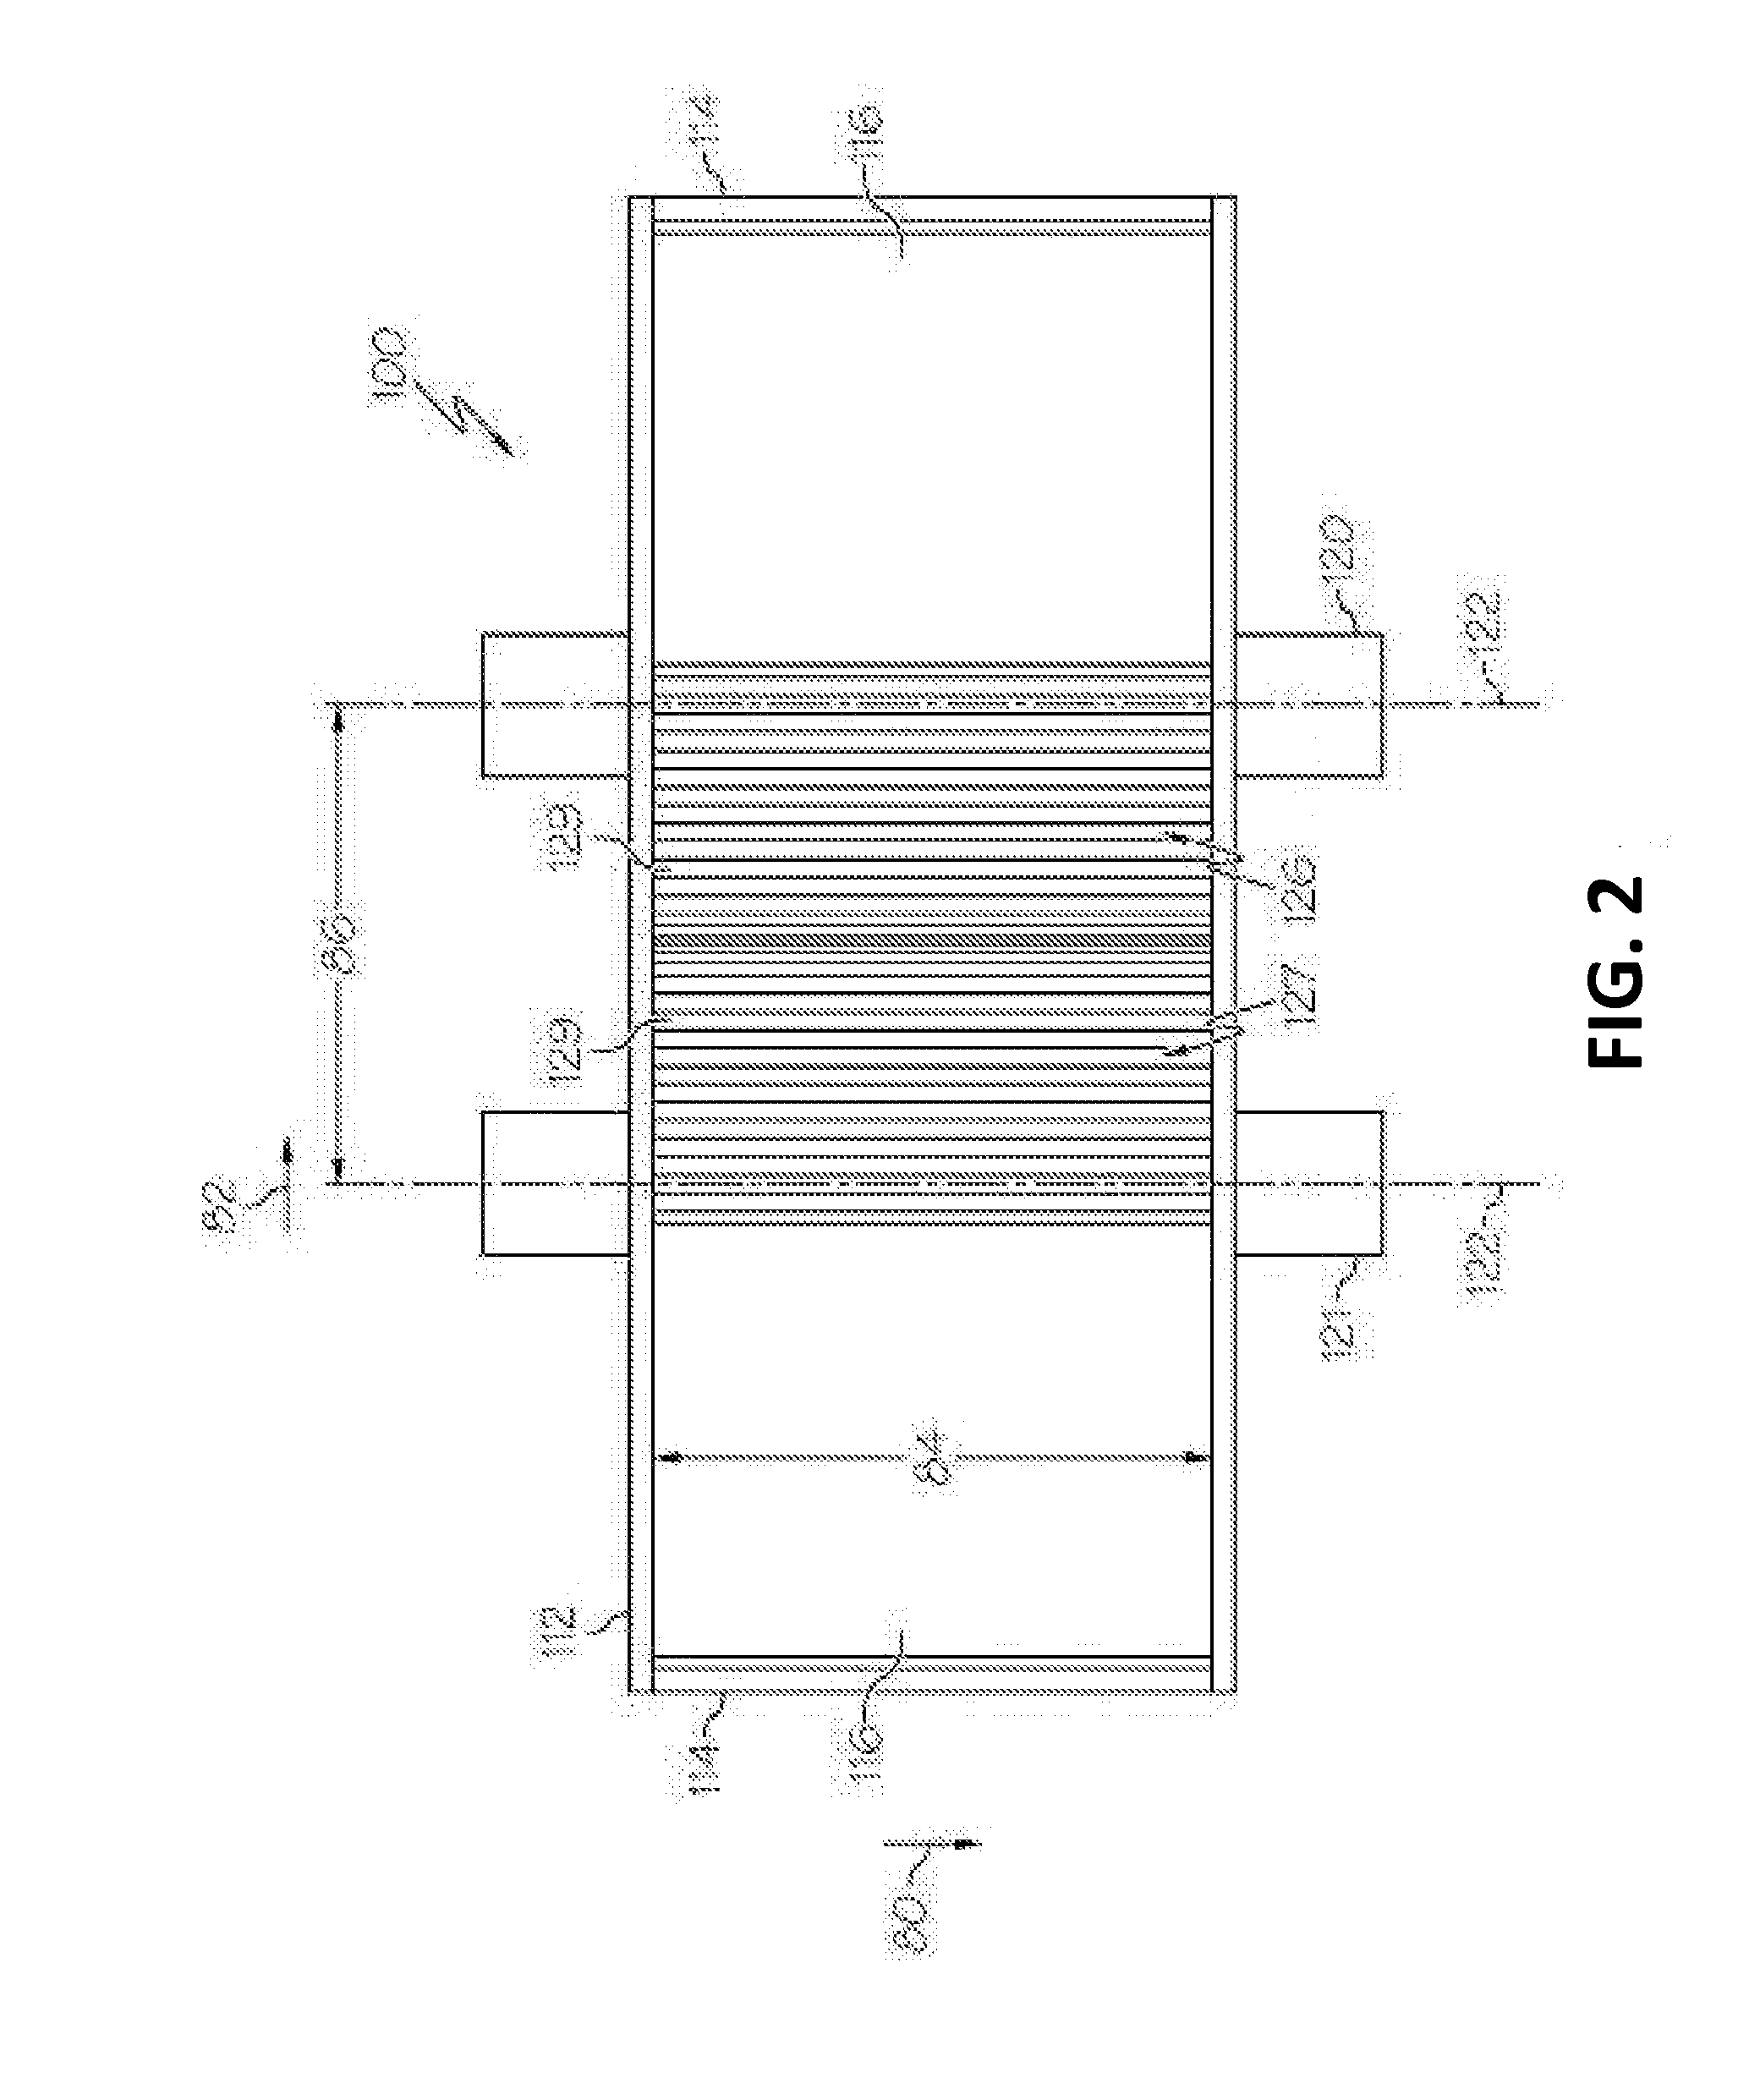 Grain Crushing Apparatuses and Processes